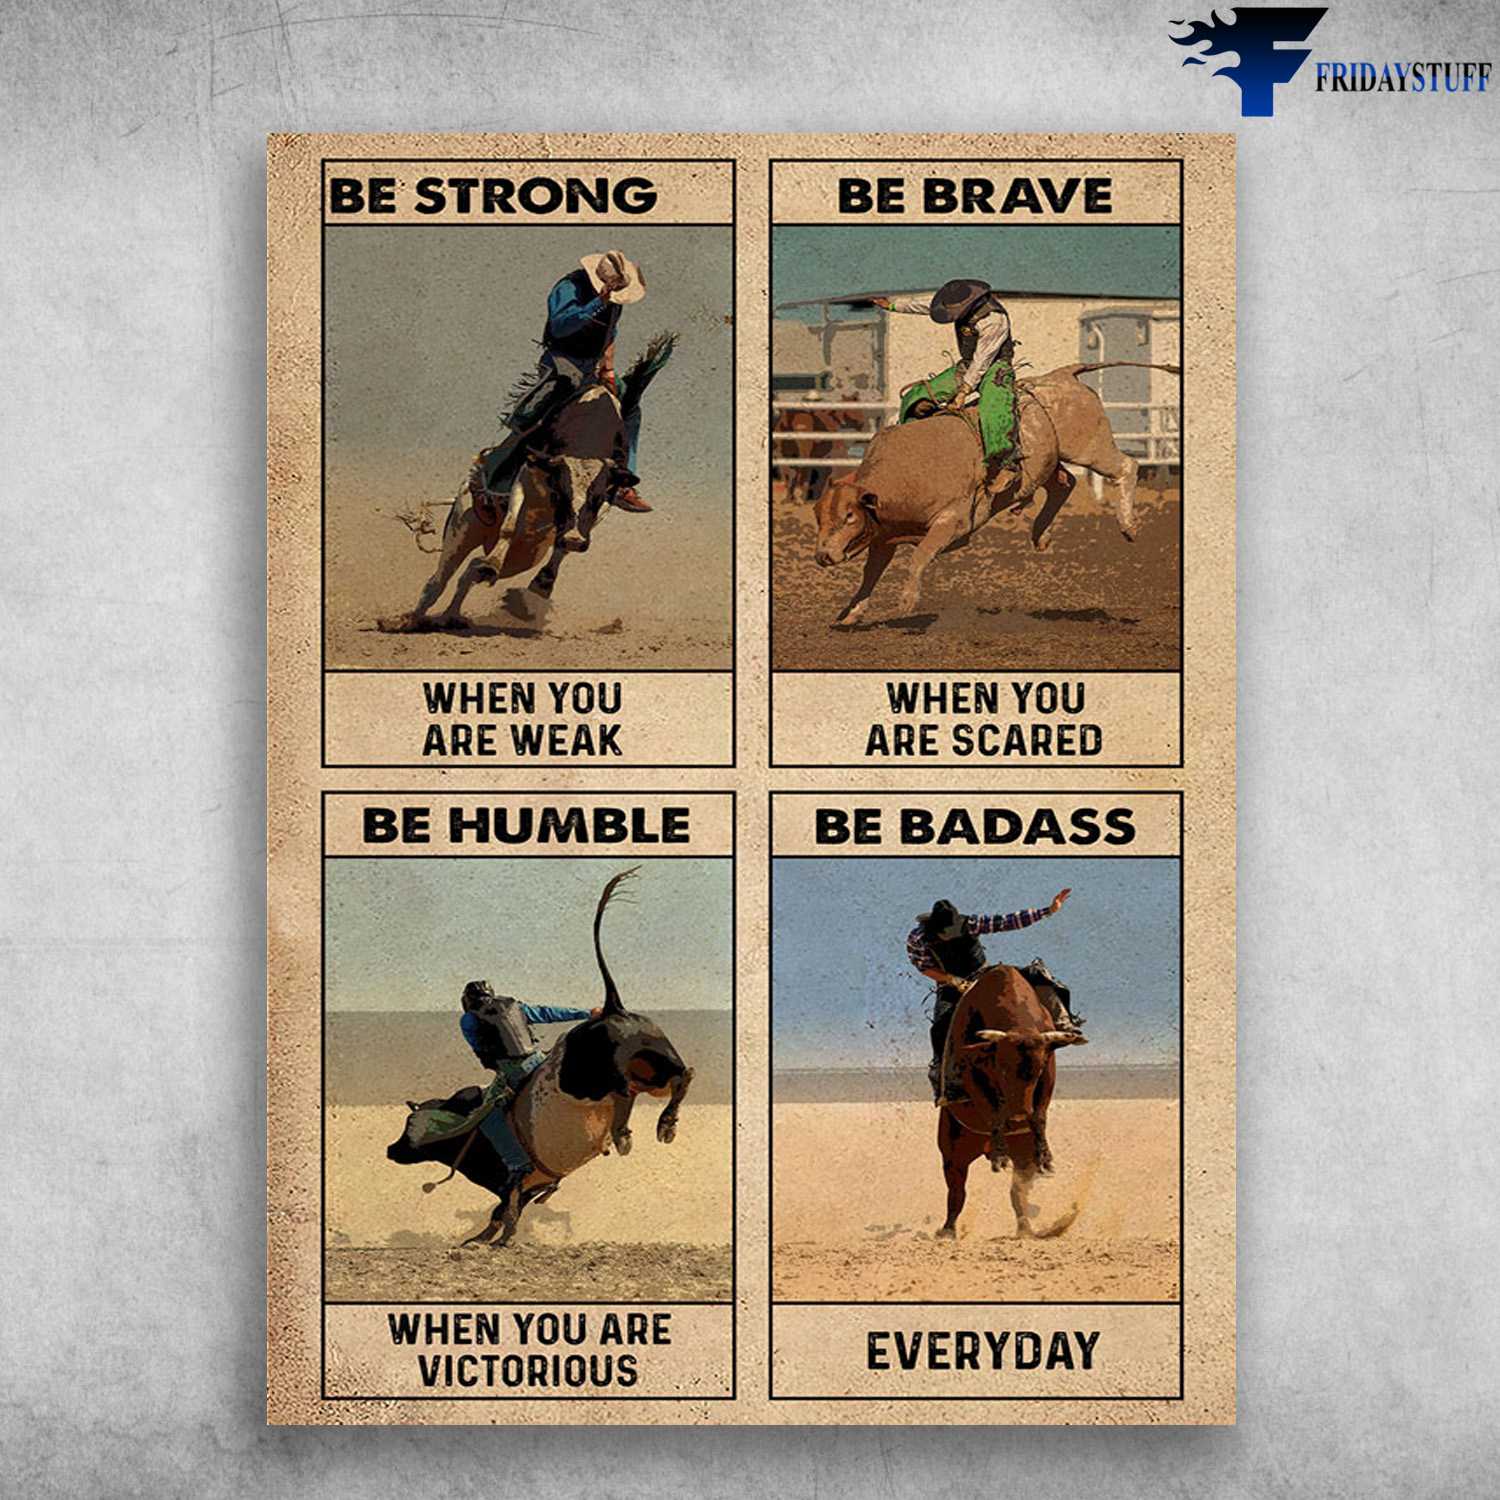 Cowboy Poster, Bull Riding - Be Strong When You Are Weak, Be Brave When You Are Scared, Be Humble When You Are Victorious, Be Badass Everyday